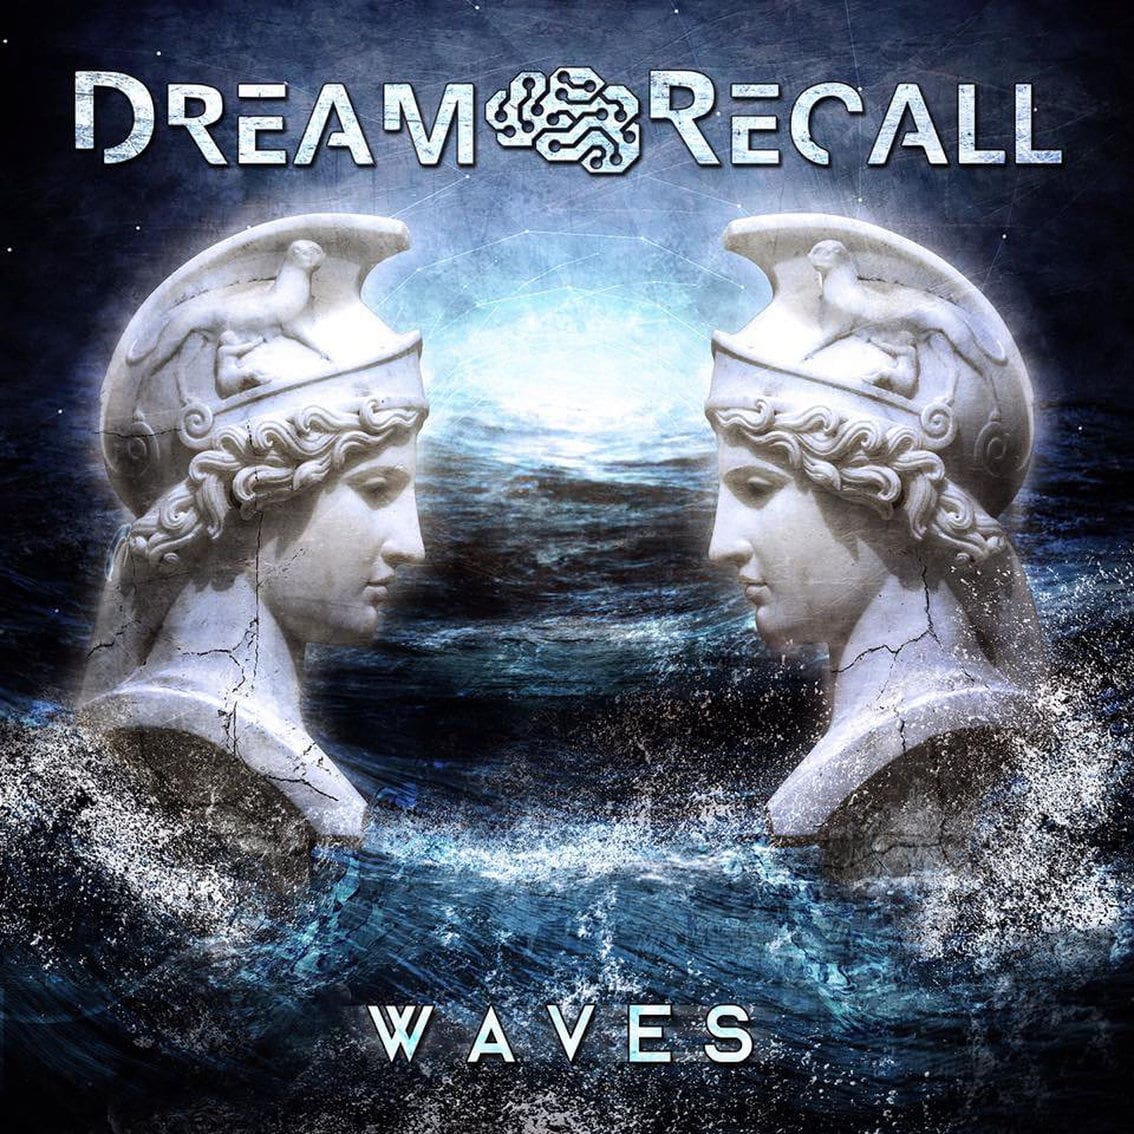 Dream Recall to launch 'Waves' EP featuring Jay Android (Heartwire/Ruinizer), Damasius (Mondträume) and Chris Anderson (Echo Grid) - pre-orders available now